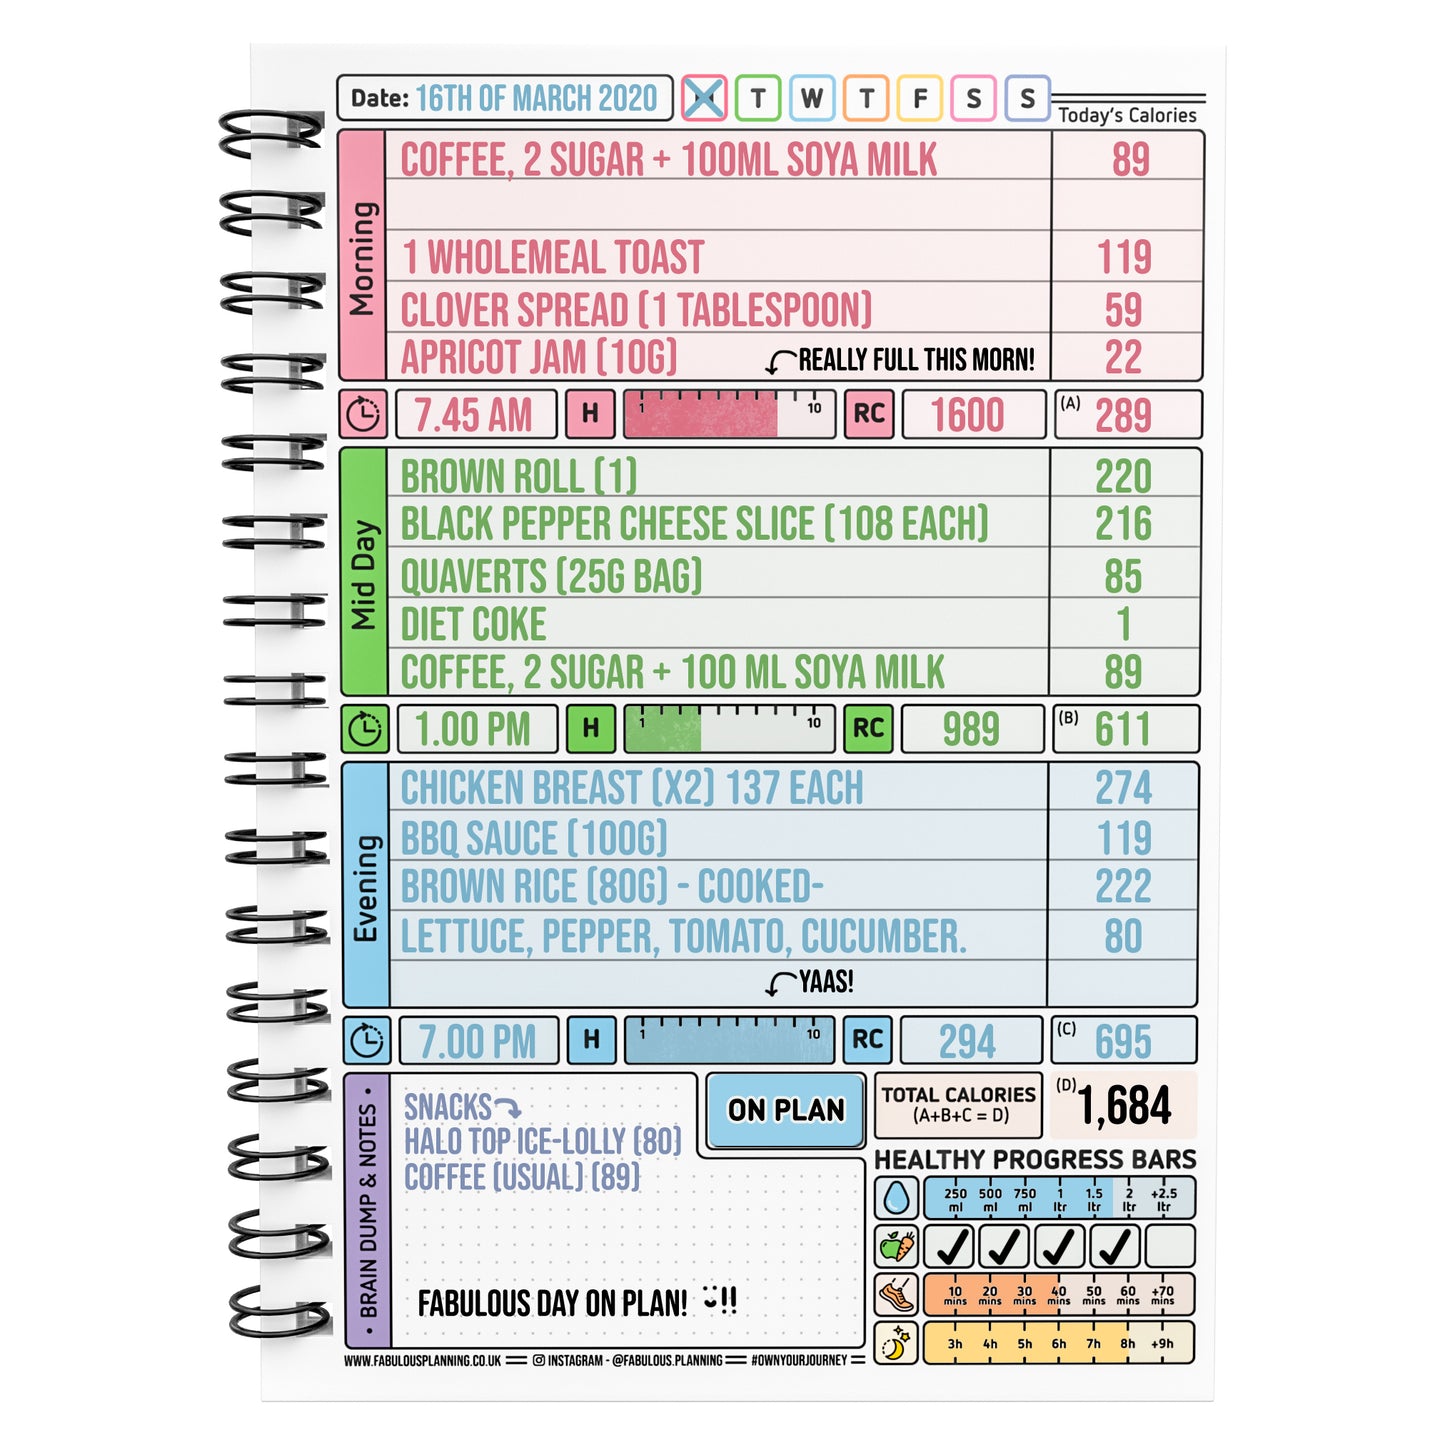 Food Diary - C26 - Calorie Counting